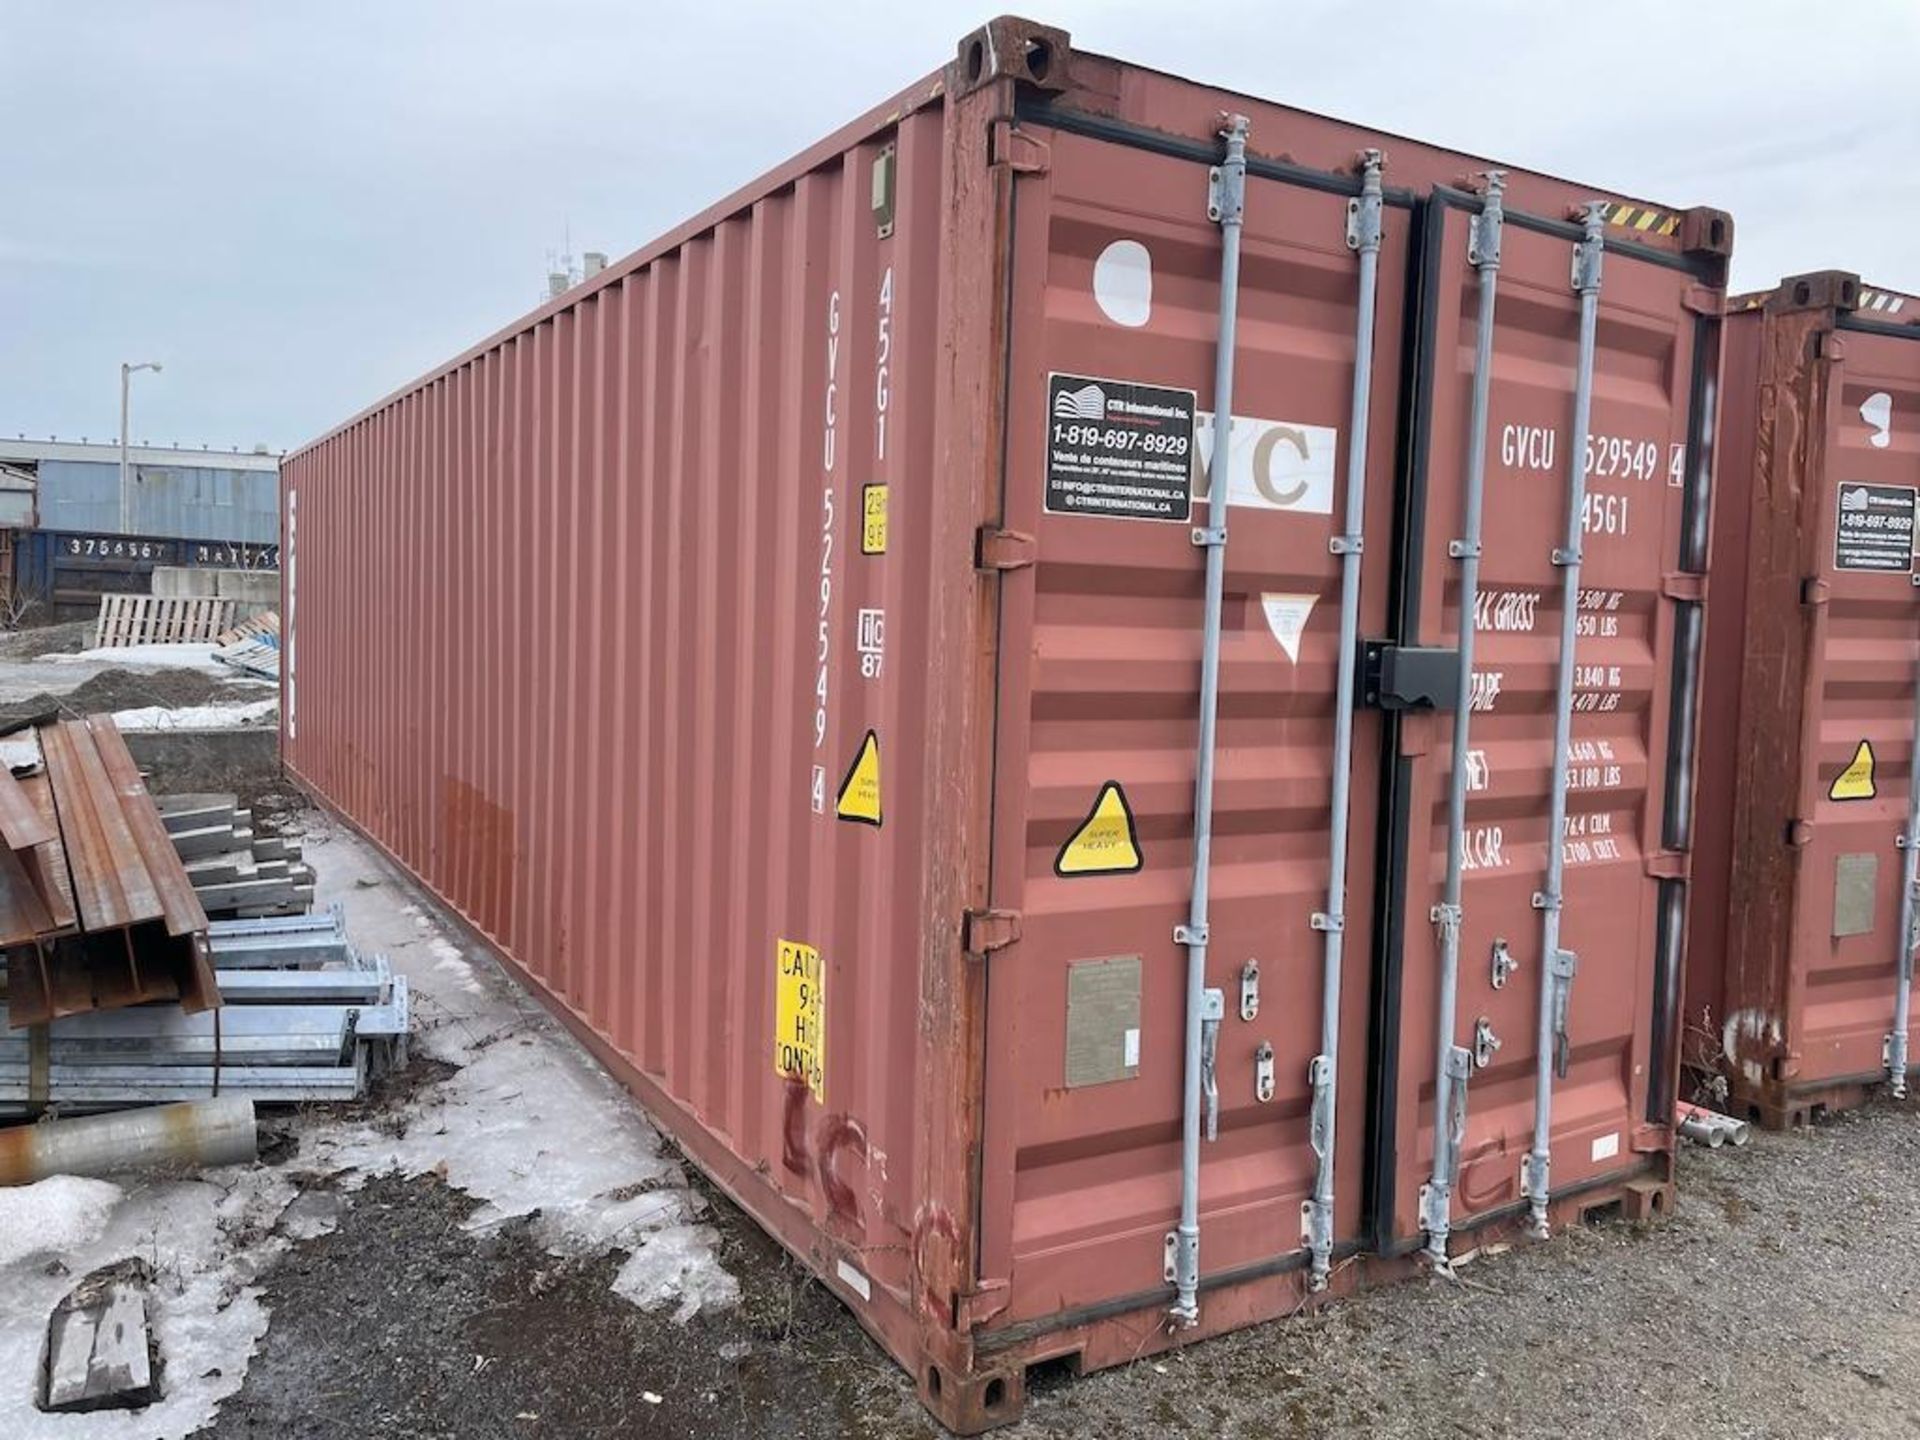 40 FT SEA CONTAINER, EXCLUDING CONTENTS, DELAYED PICK UP UNTIL MAY 13 [20] [TROIS RIVIERES] *PLEASE